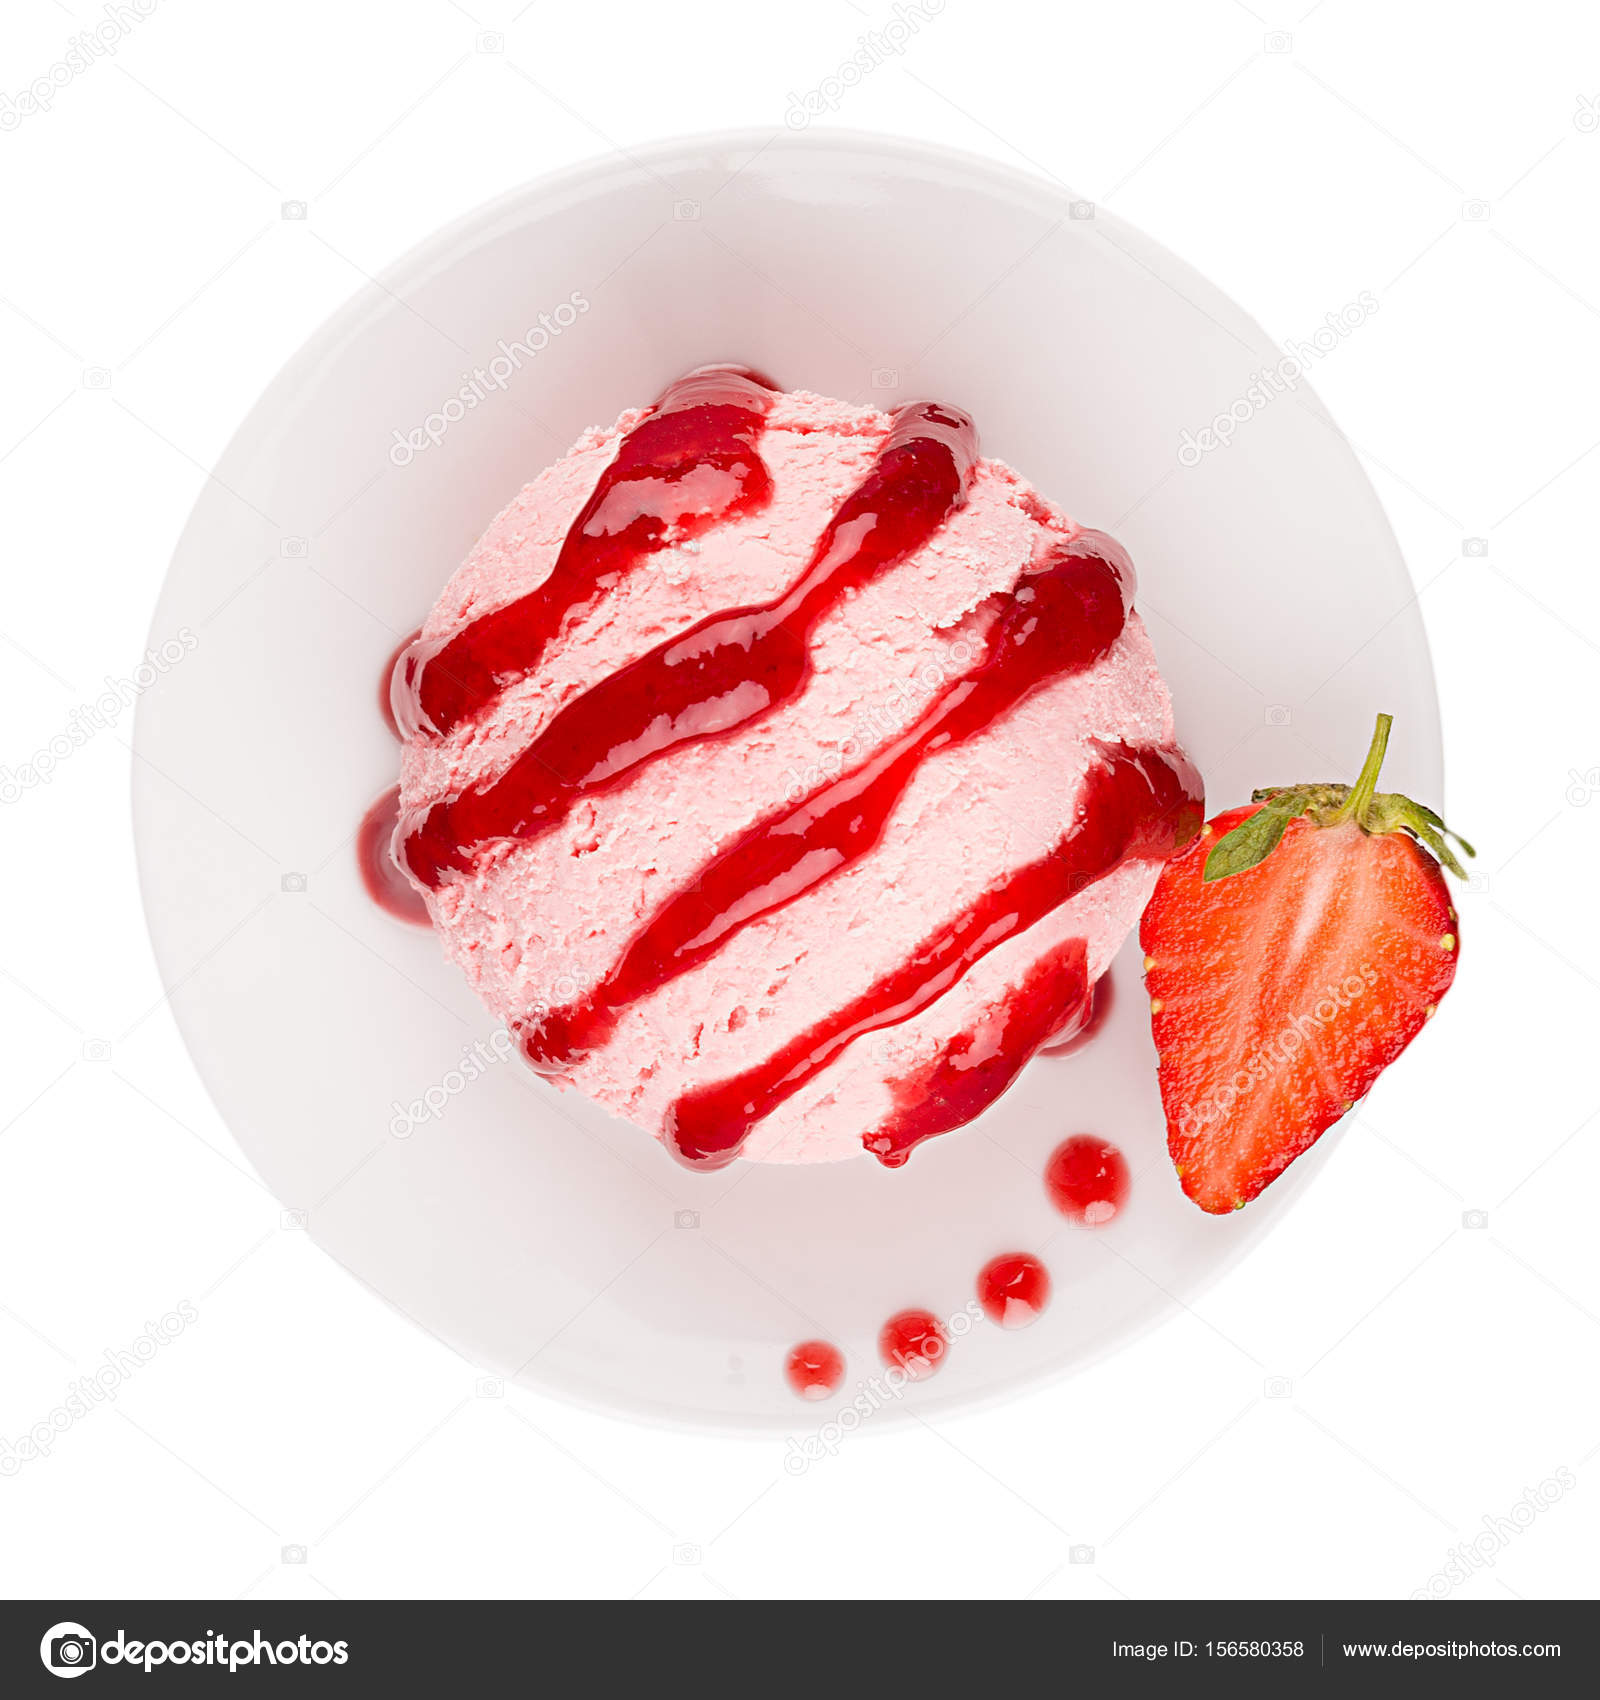 Strawberry ice cream scoop from top or top view isolated on white